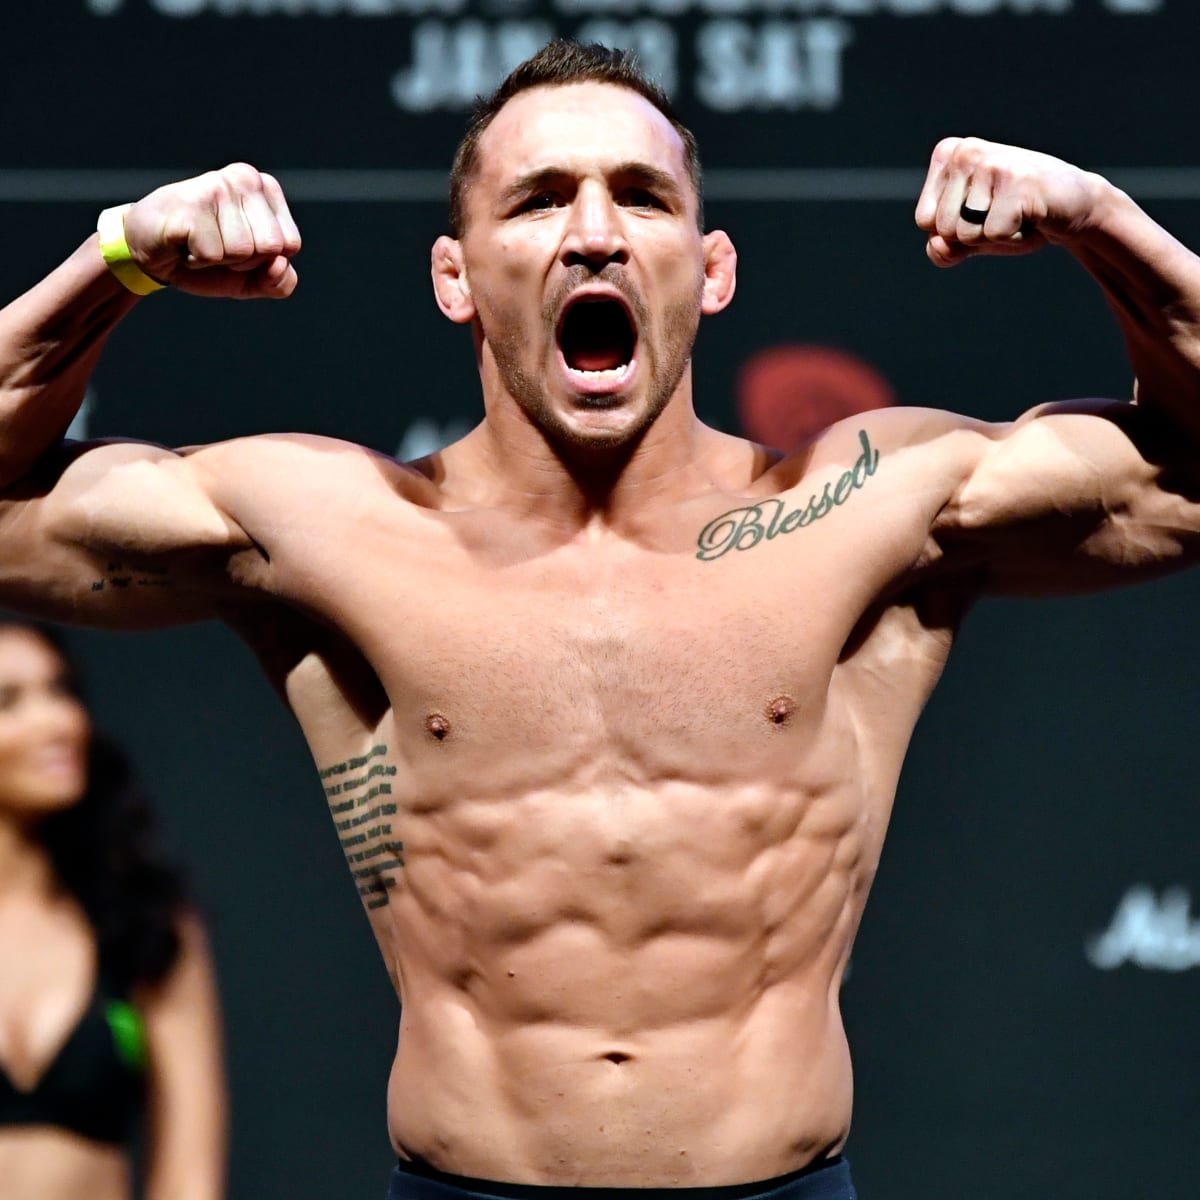 Michael Chandler vs. Tony Ferguson Added to UFC 274 Card: Sources 